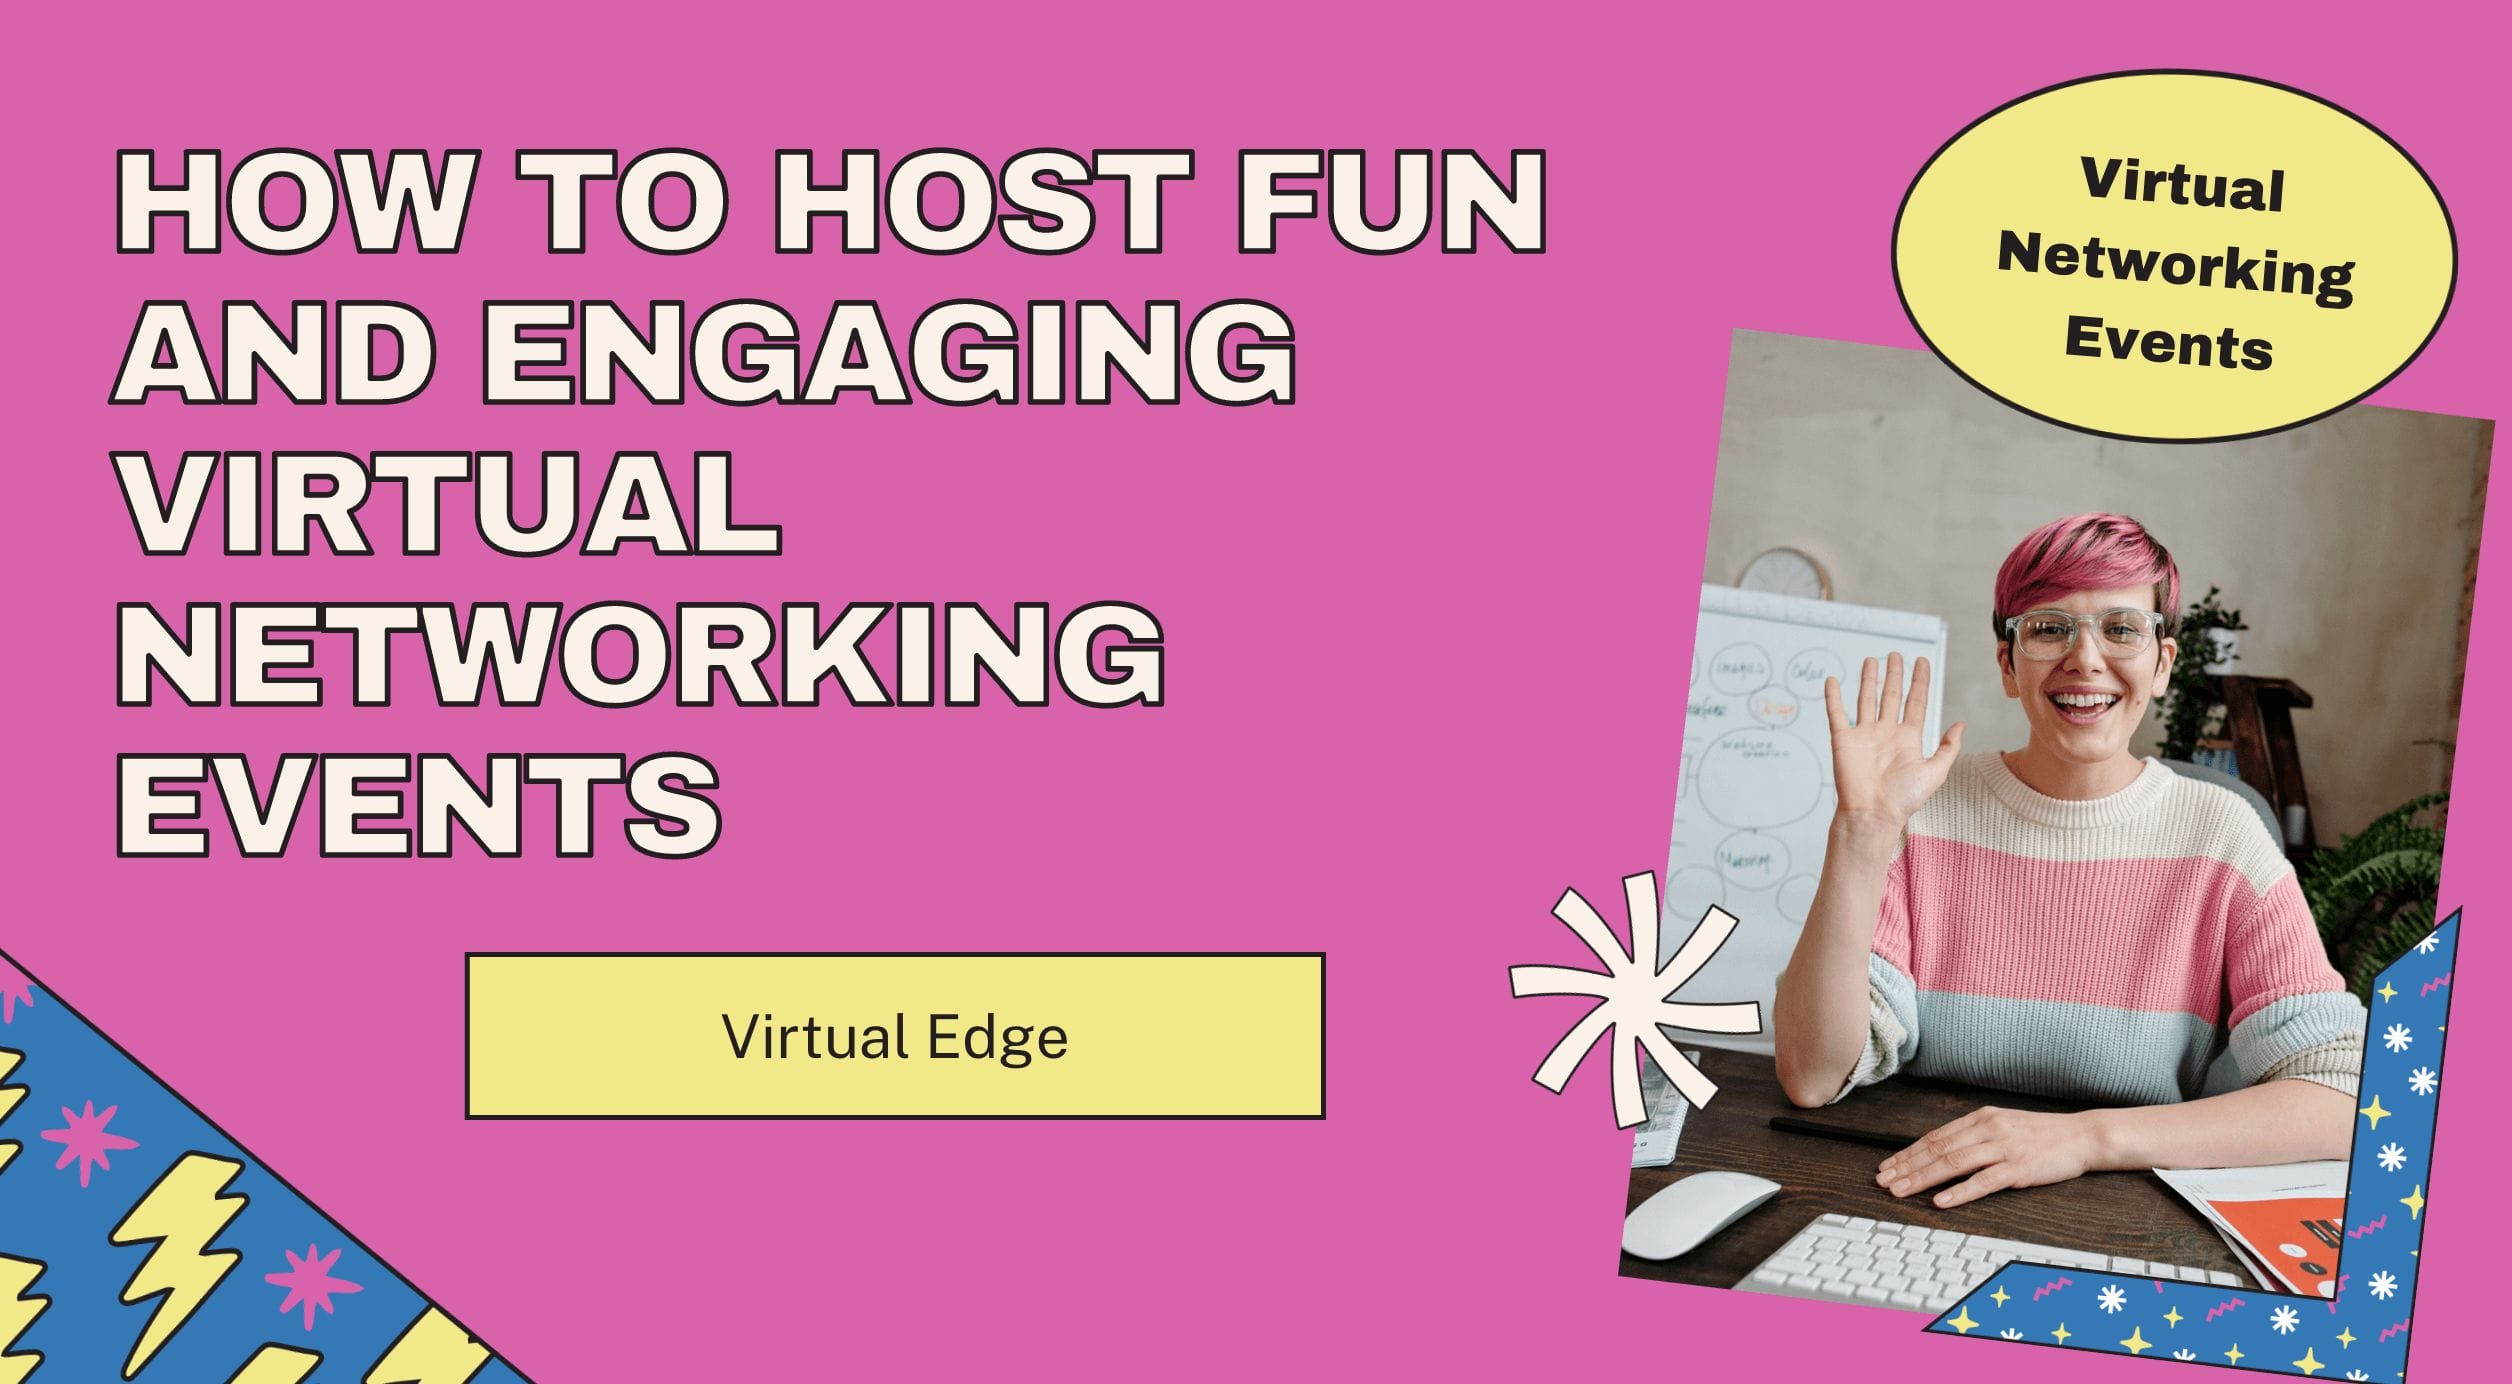 How to Host Fun and Engaging Virtual Networking Events